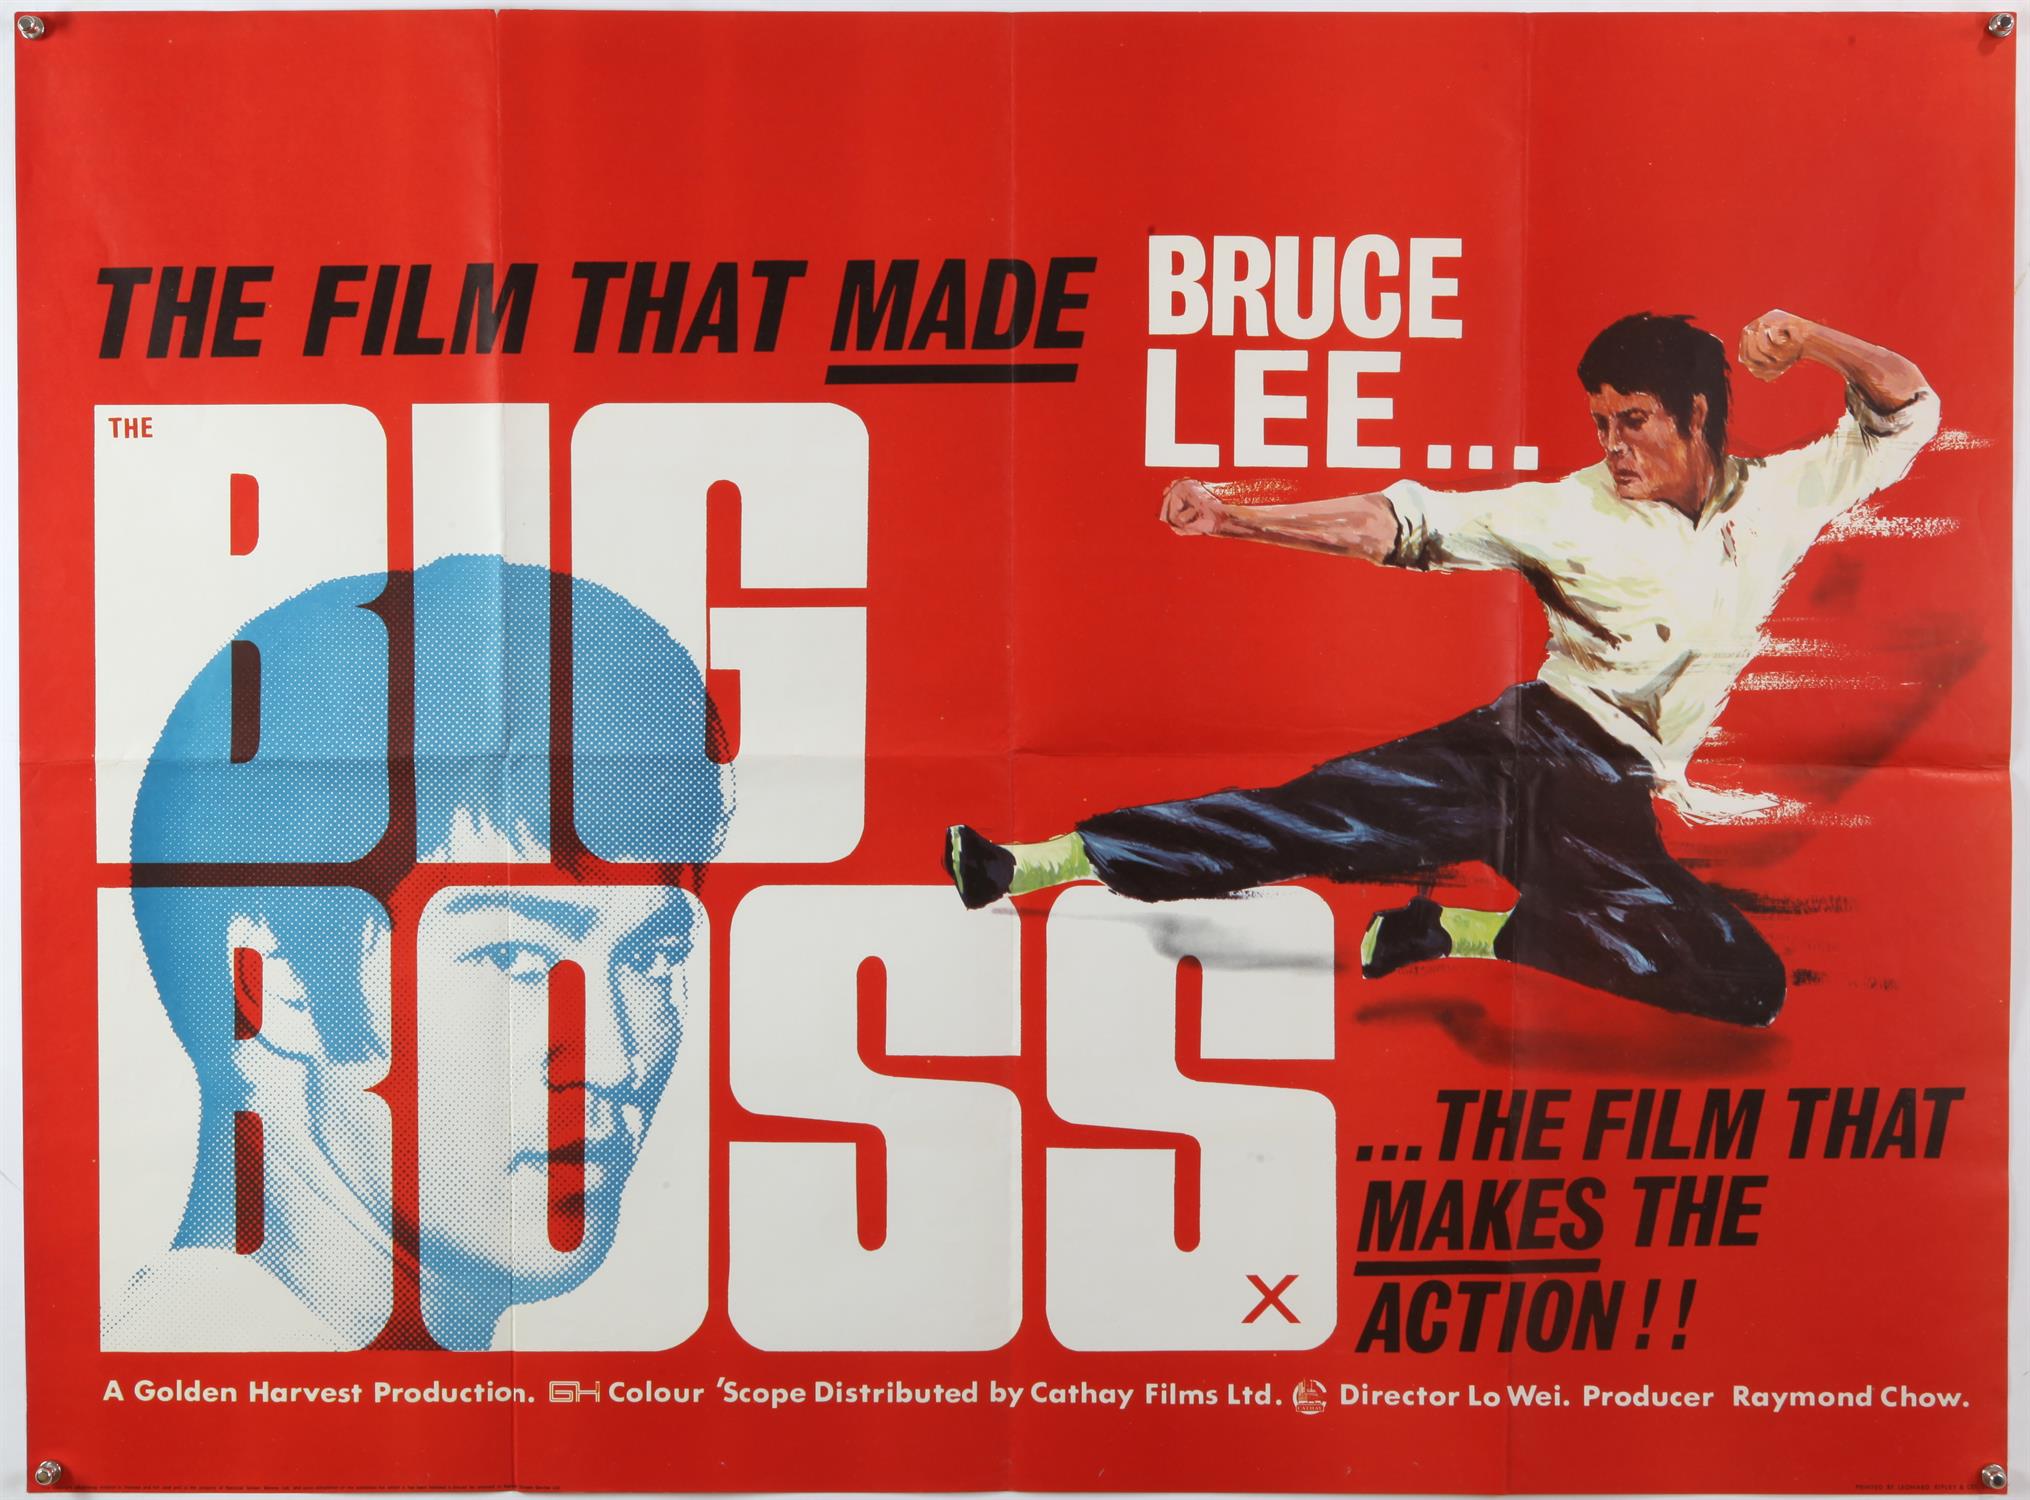 Bruce Lee The Big Boss (1971) British Quad film poster for this early Bruce Lee film,